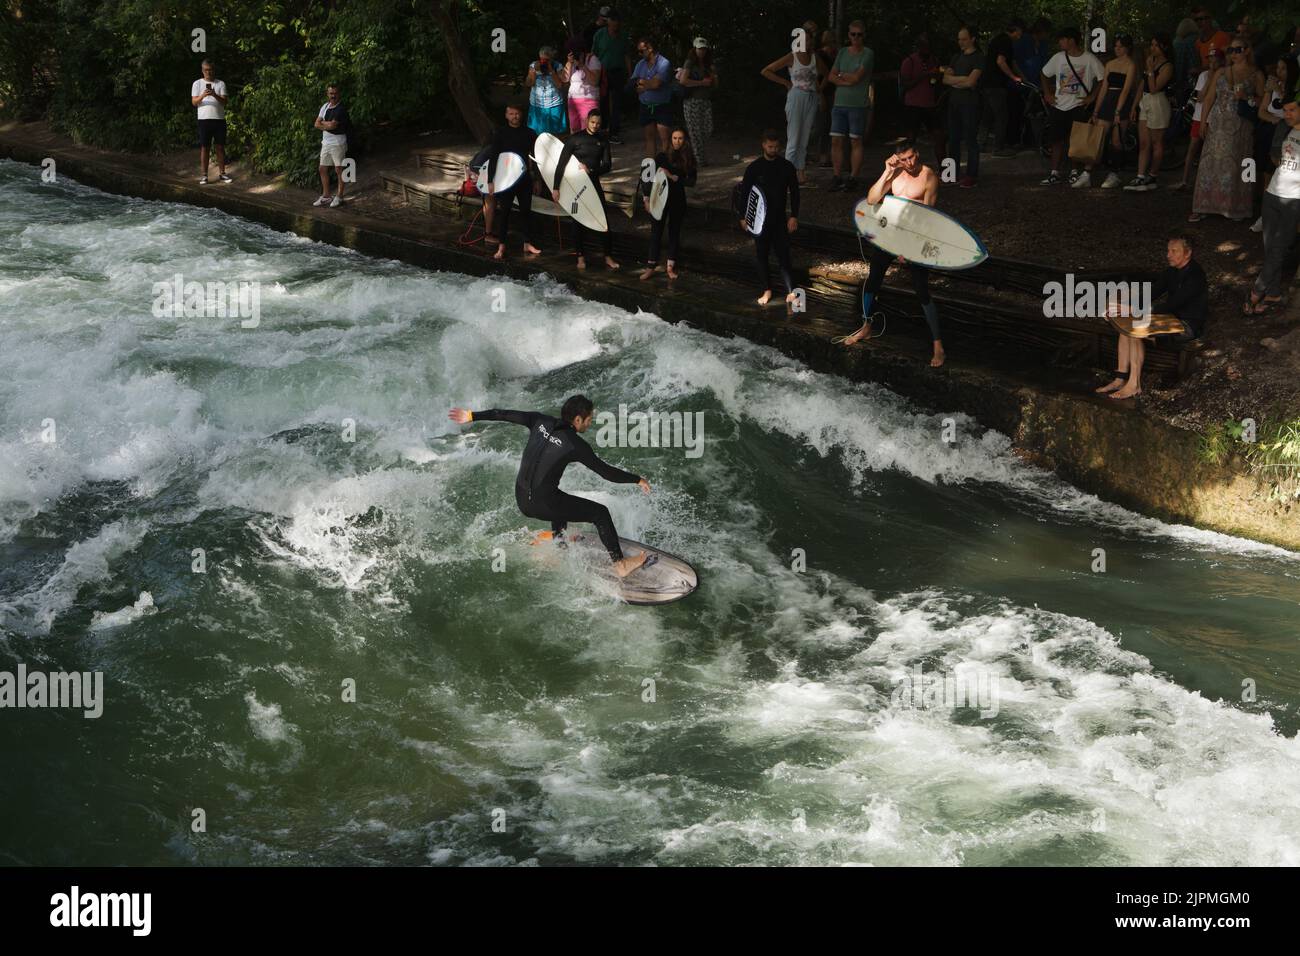 Surfer on the surfboard surfs on the artificial wave on the Eisbach River at the popular river surfing spot known as the Eisbachwelle (Eisbach Wave) in the Englischer Garten (English Garden) in Munich in Bavaria, Germany. Stock Photo